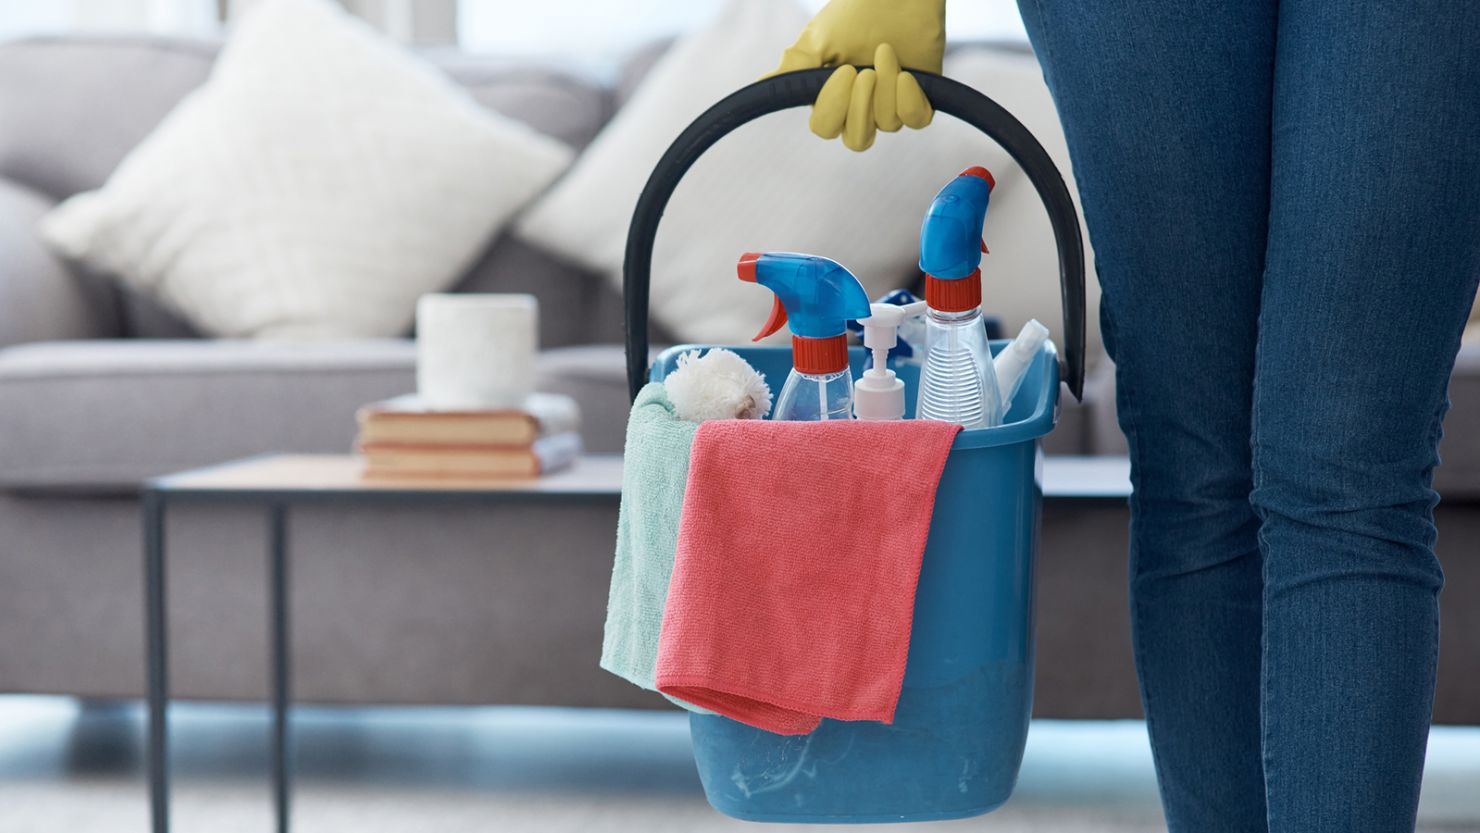 The 17 Best Organizers and Cleaning Supplies Every Home Cook Needs for 2022